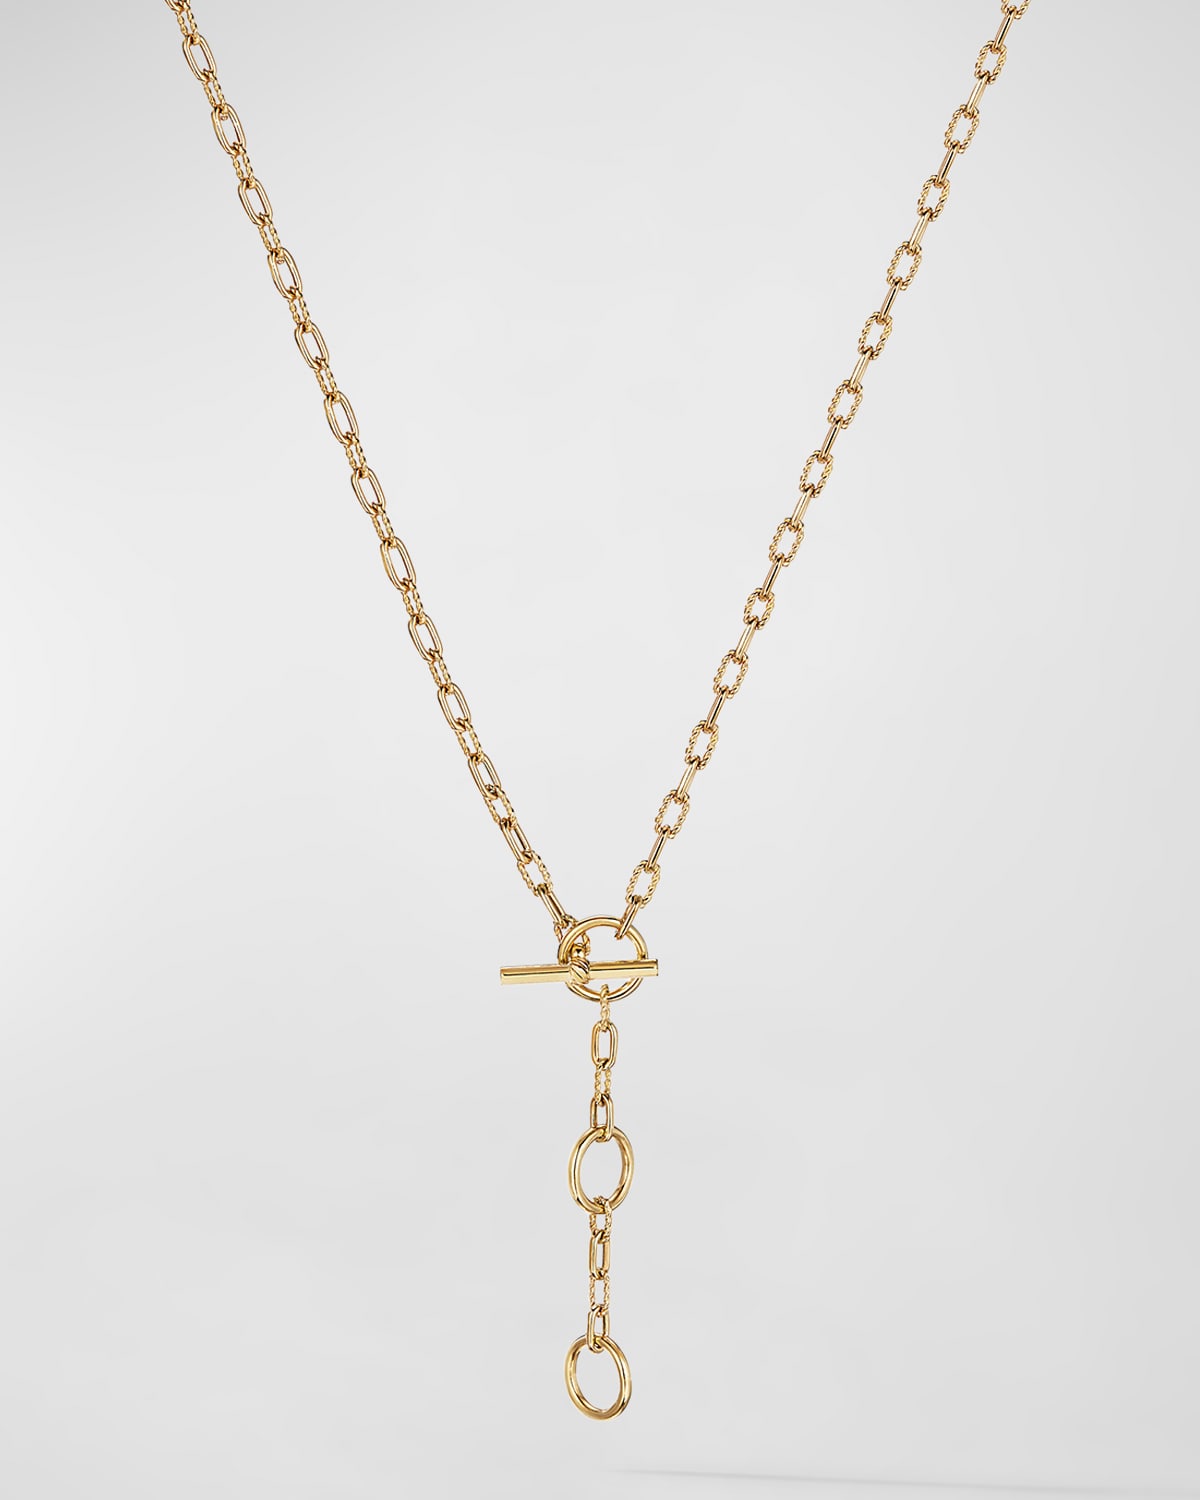 David Yurman Madison 3-ring Chain Necklace In 18k Gold, 3.9mm, 18-20"l